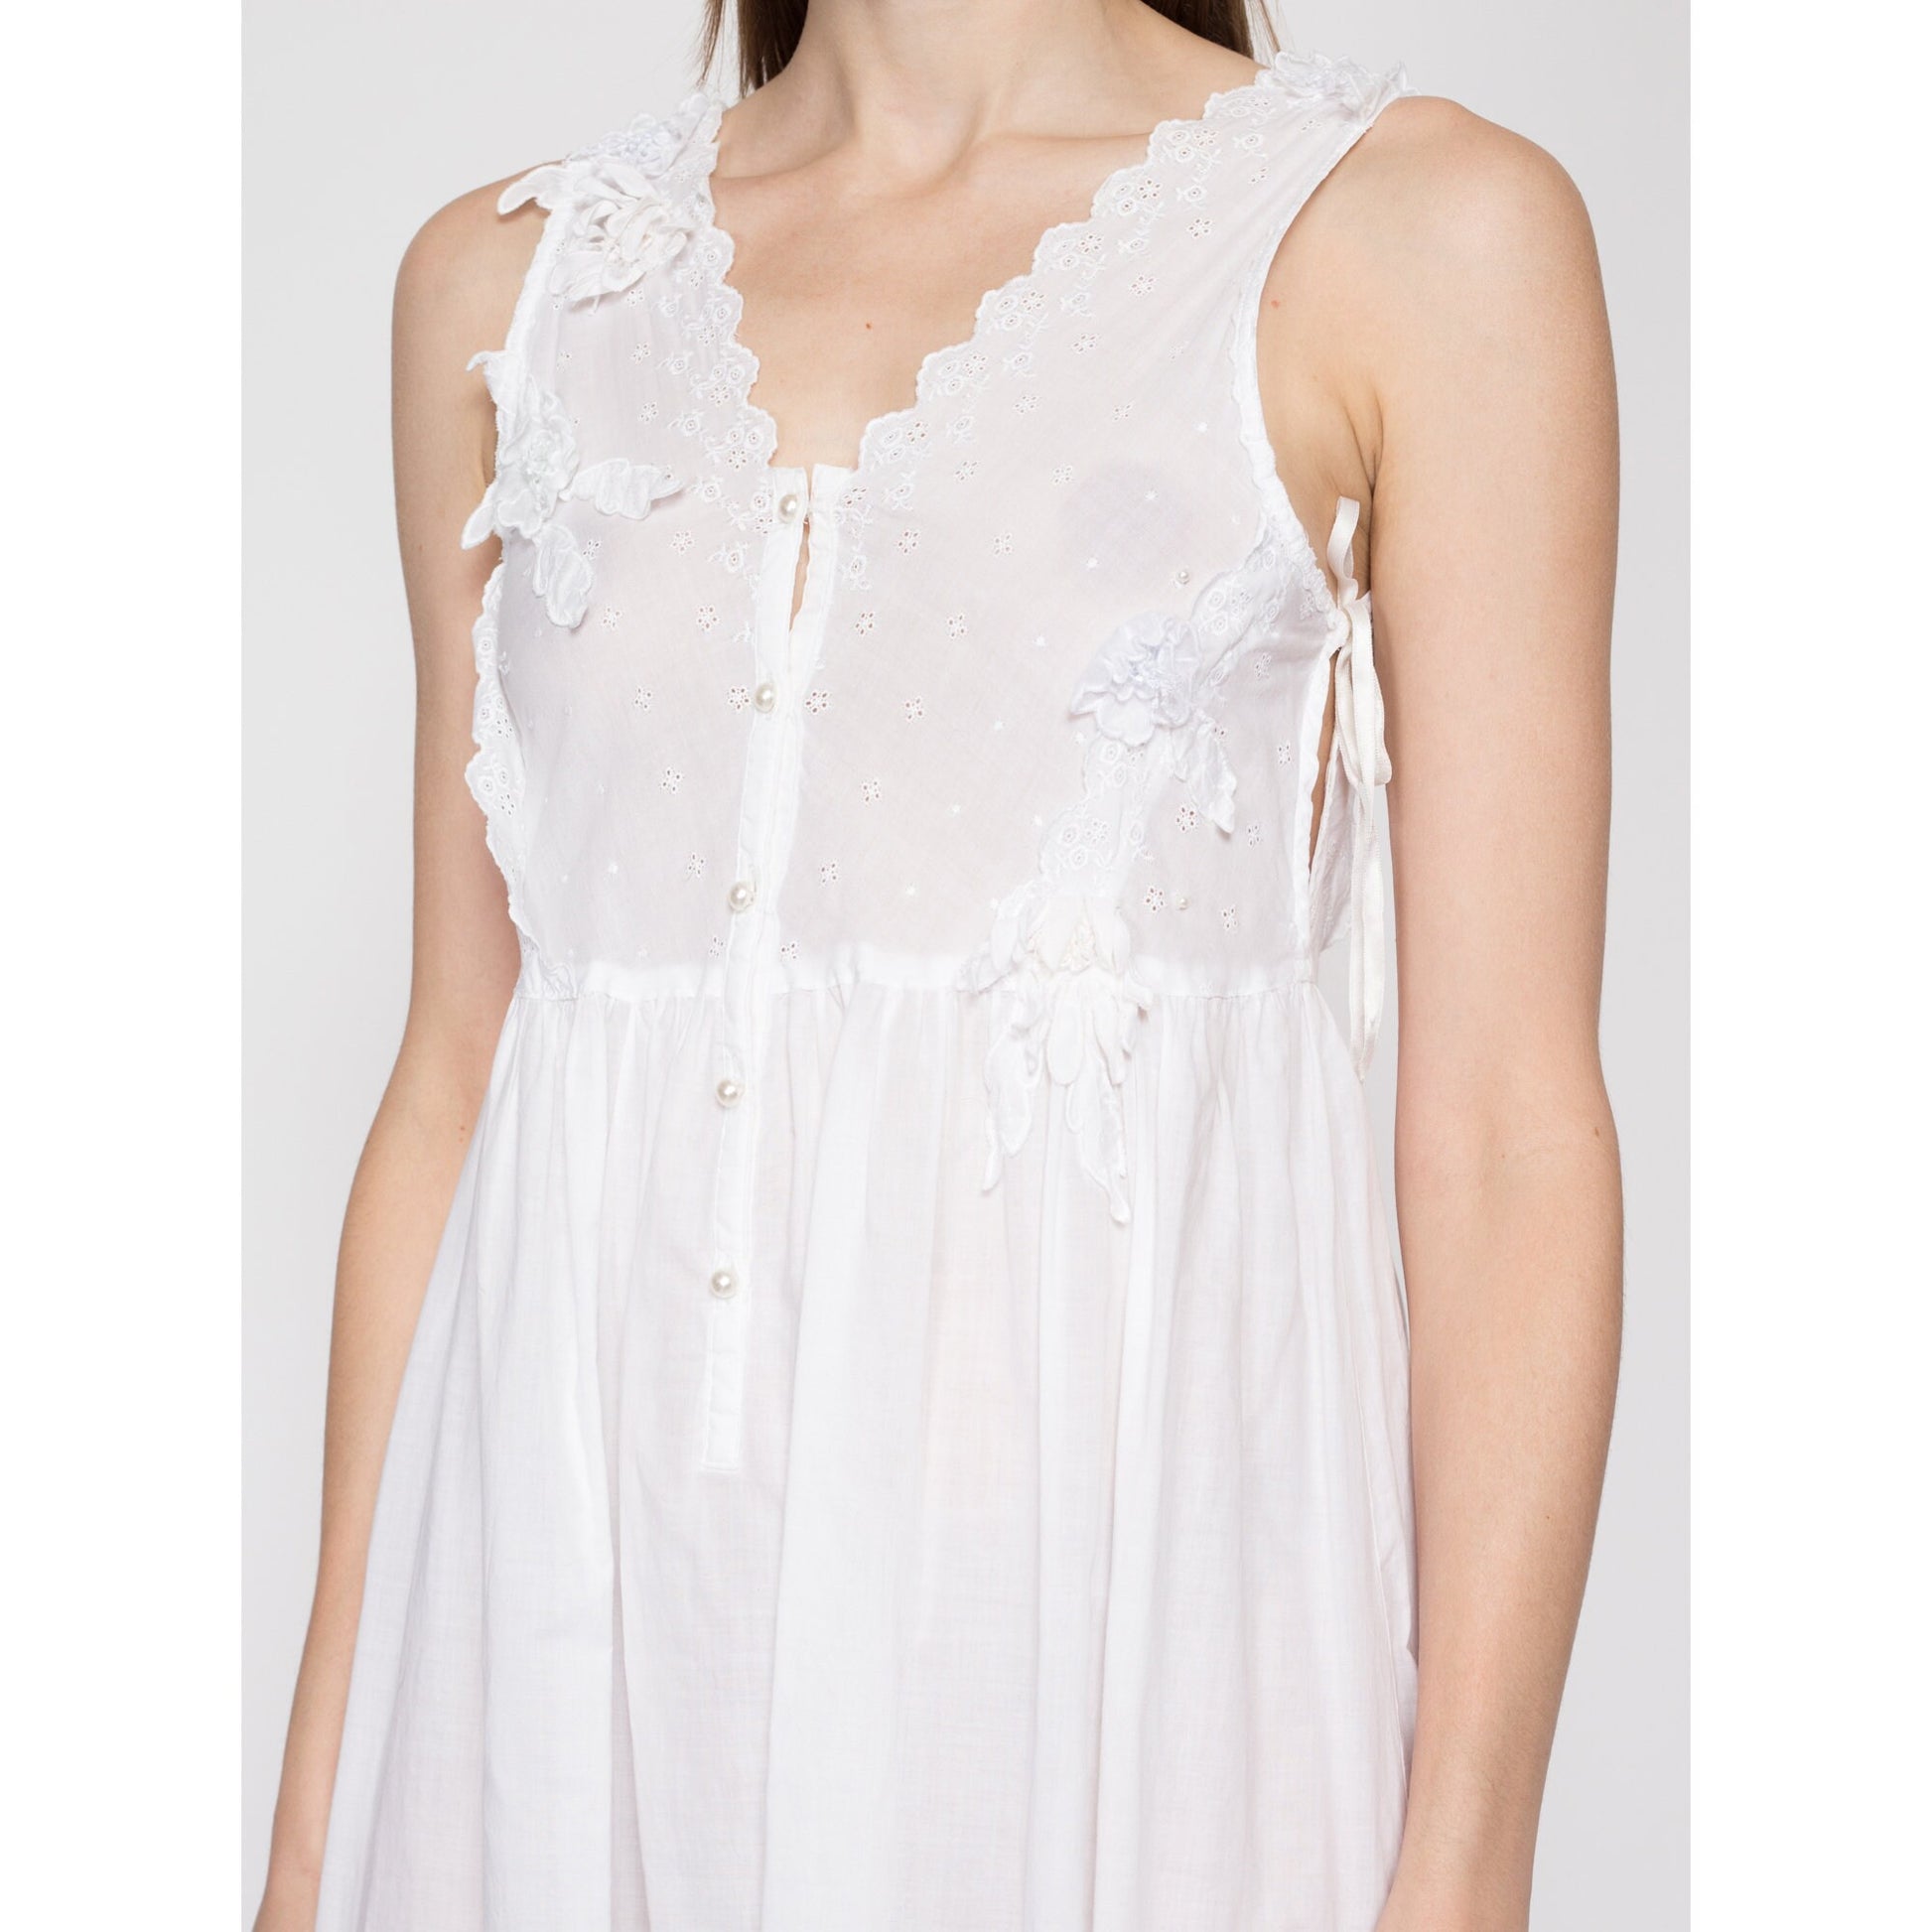 White Lace Sheer Tank Top – Free From Label